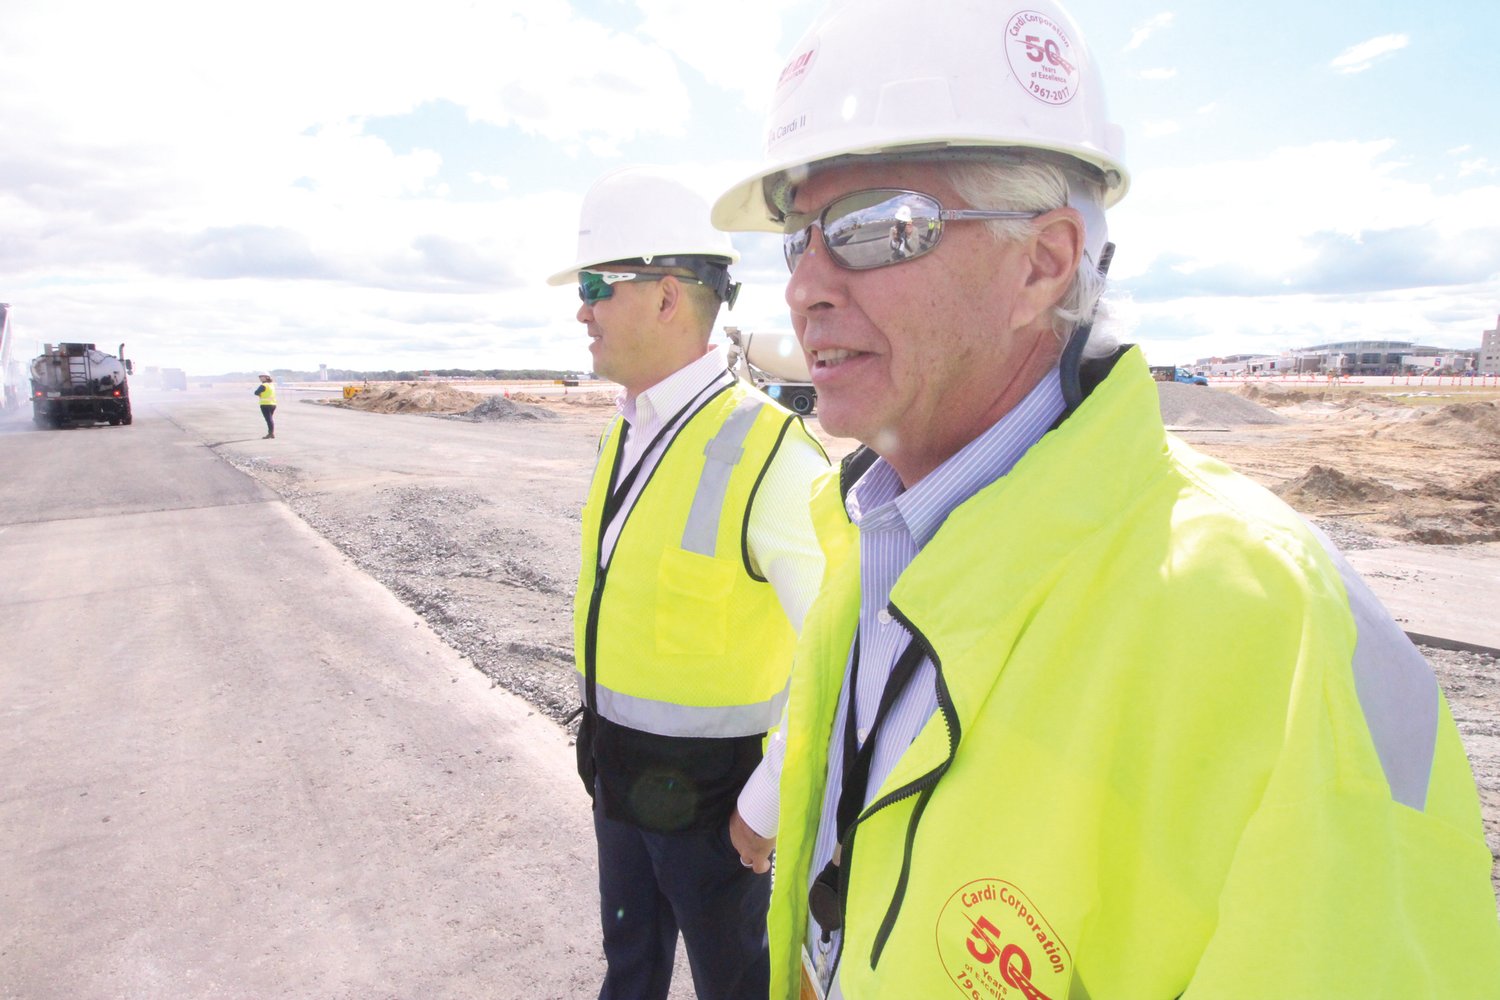 THE BOSS IS CHECKING IT OUT: Stephen Cardi II, right, and Duc Nguyen survey progress on the reconstruction of Runway 16-34.